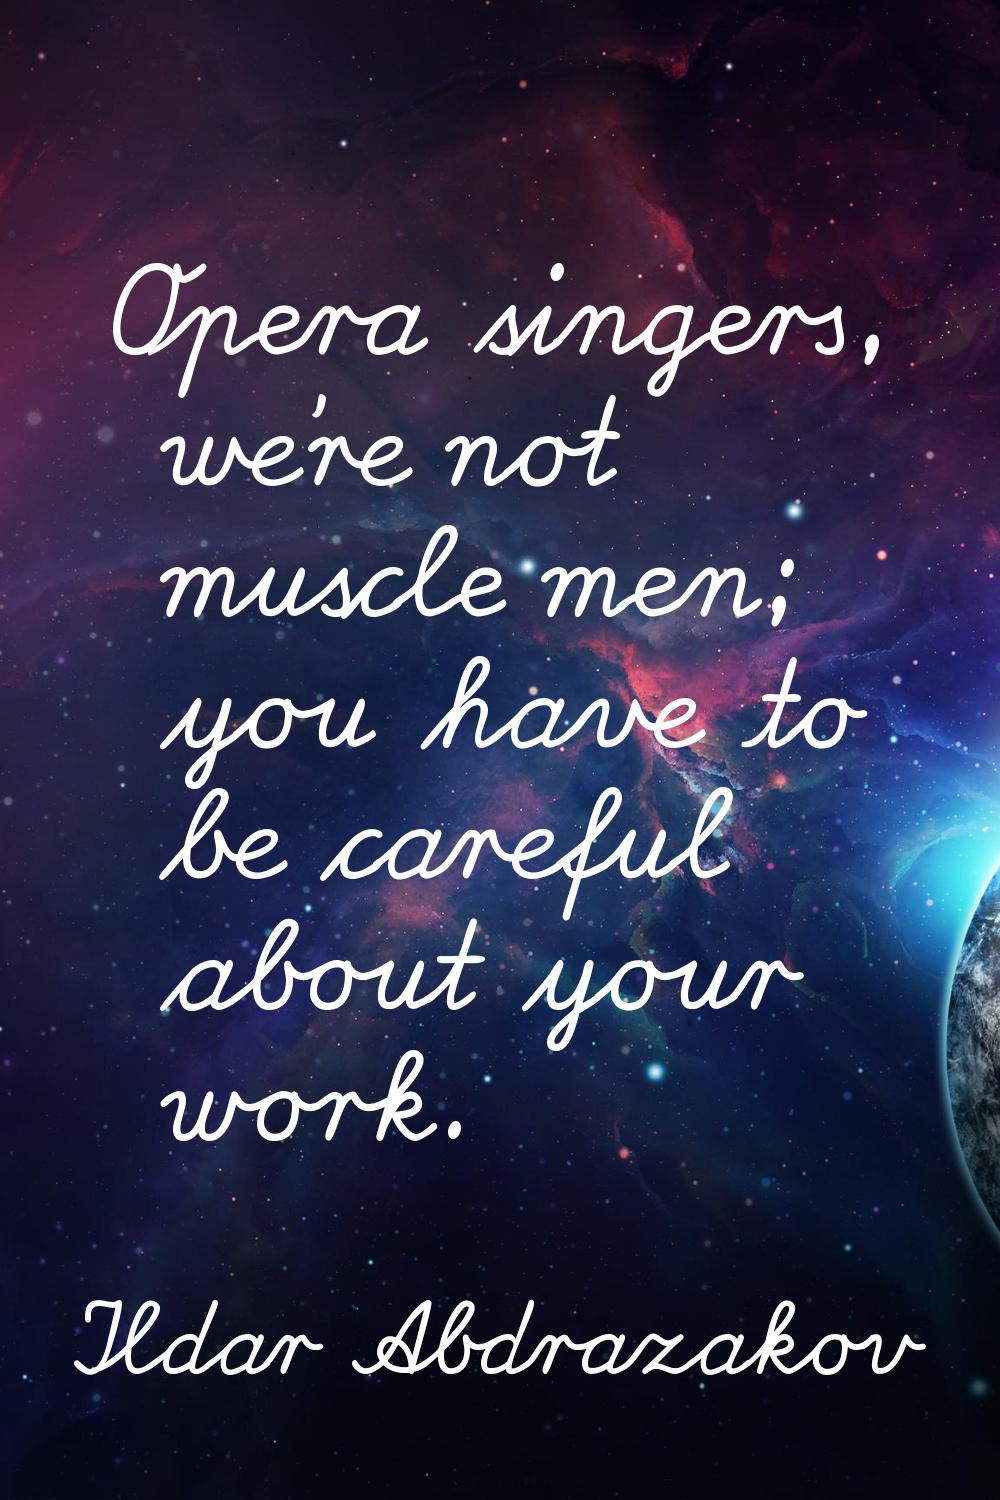 Opera singers, we're not muscle men; you have to be careful about your work.